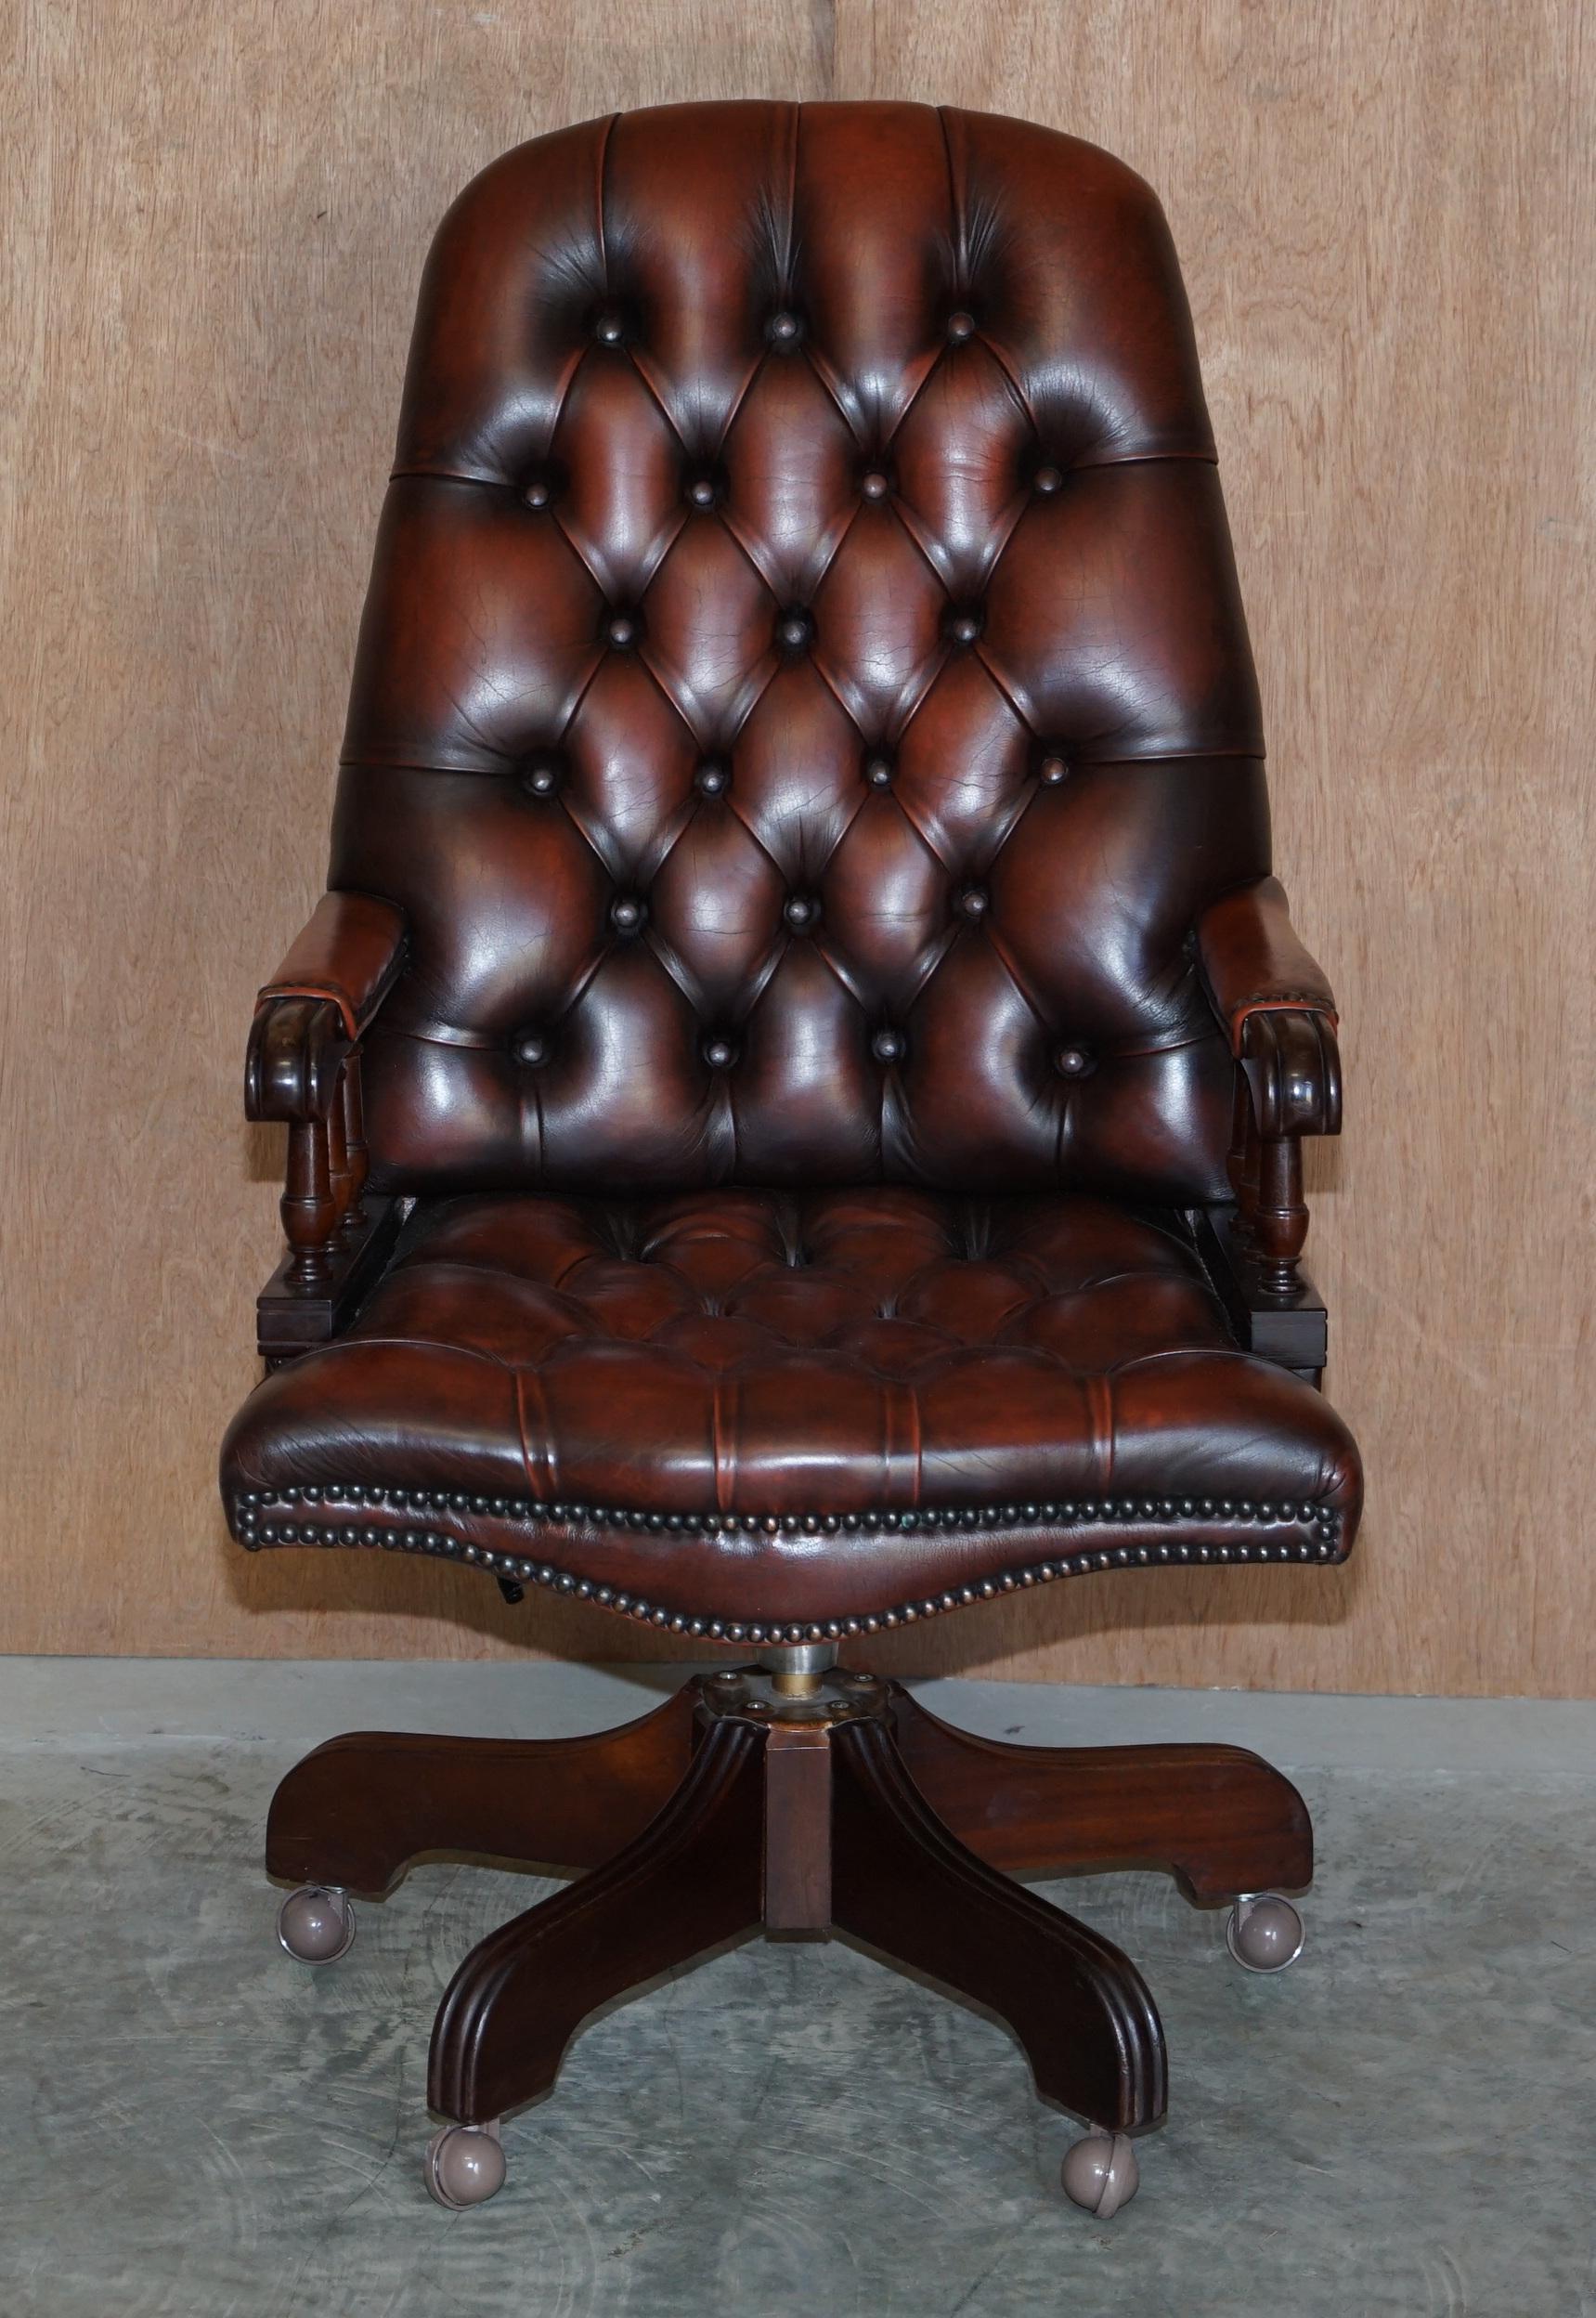 We are delighted to offer for sale this lovely original vintage high back hand dyed Chestnut brown leather Chesterfield tufted captains chair

A very good looking well made and comfortable directors chair. Its chesterfield buttoned both back and